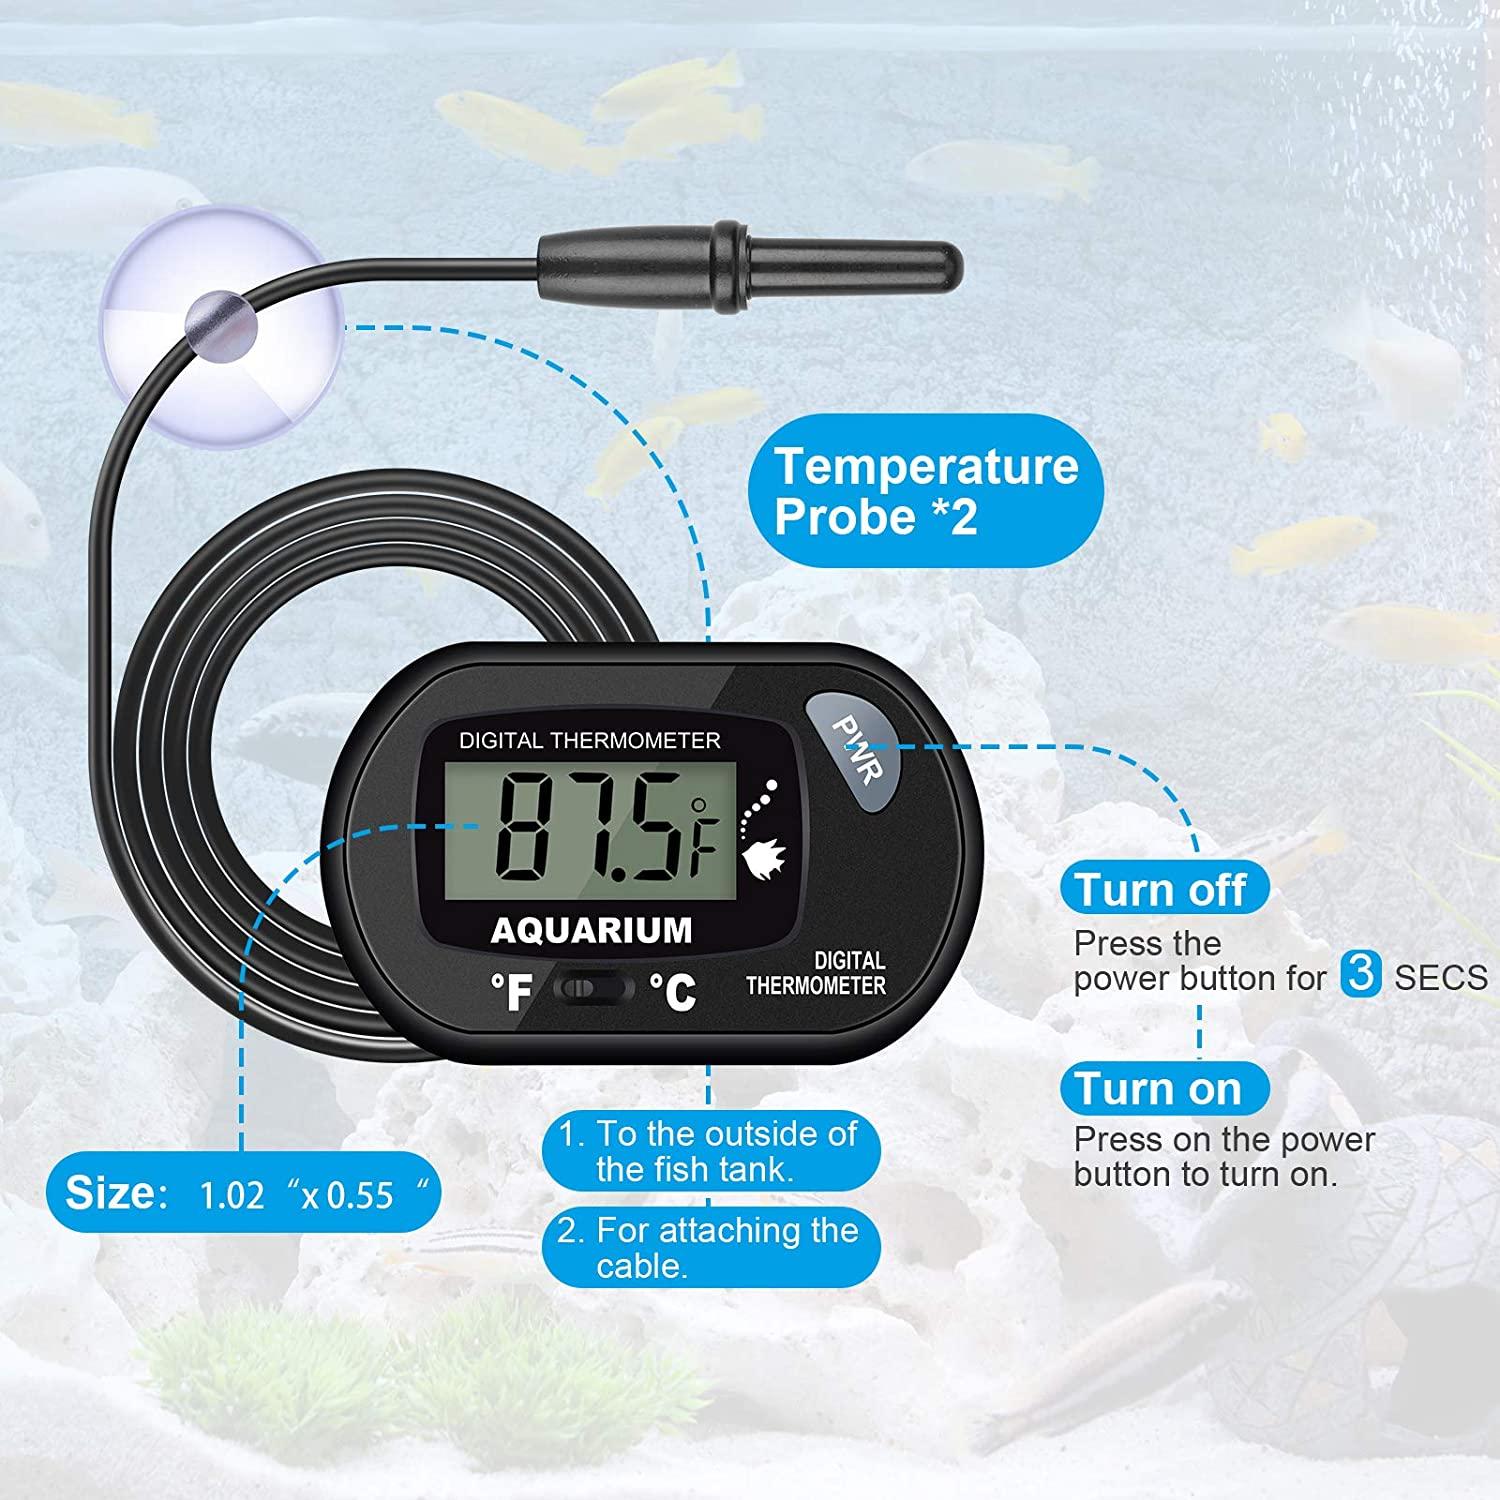 Aquarium Thermometer, Fish Tank Thermometer, Water Thermometer